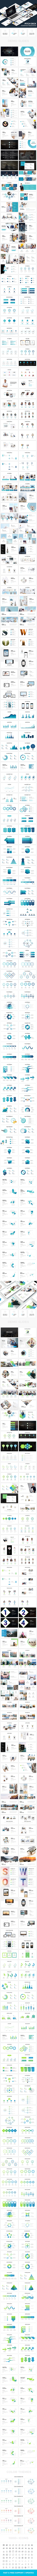 Bundle 2 in 1  Business Plan Powerpoint Template